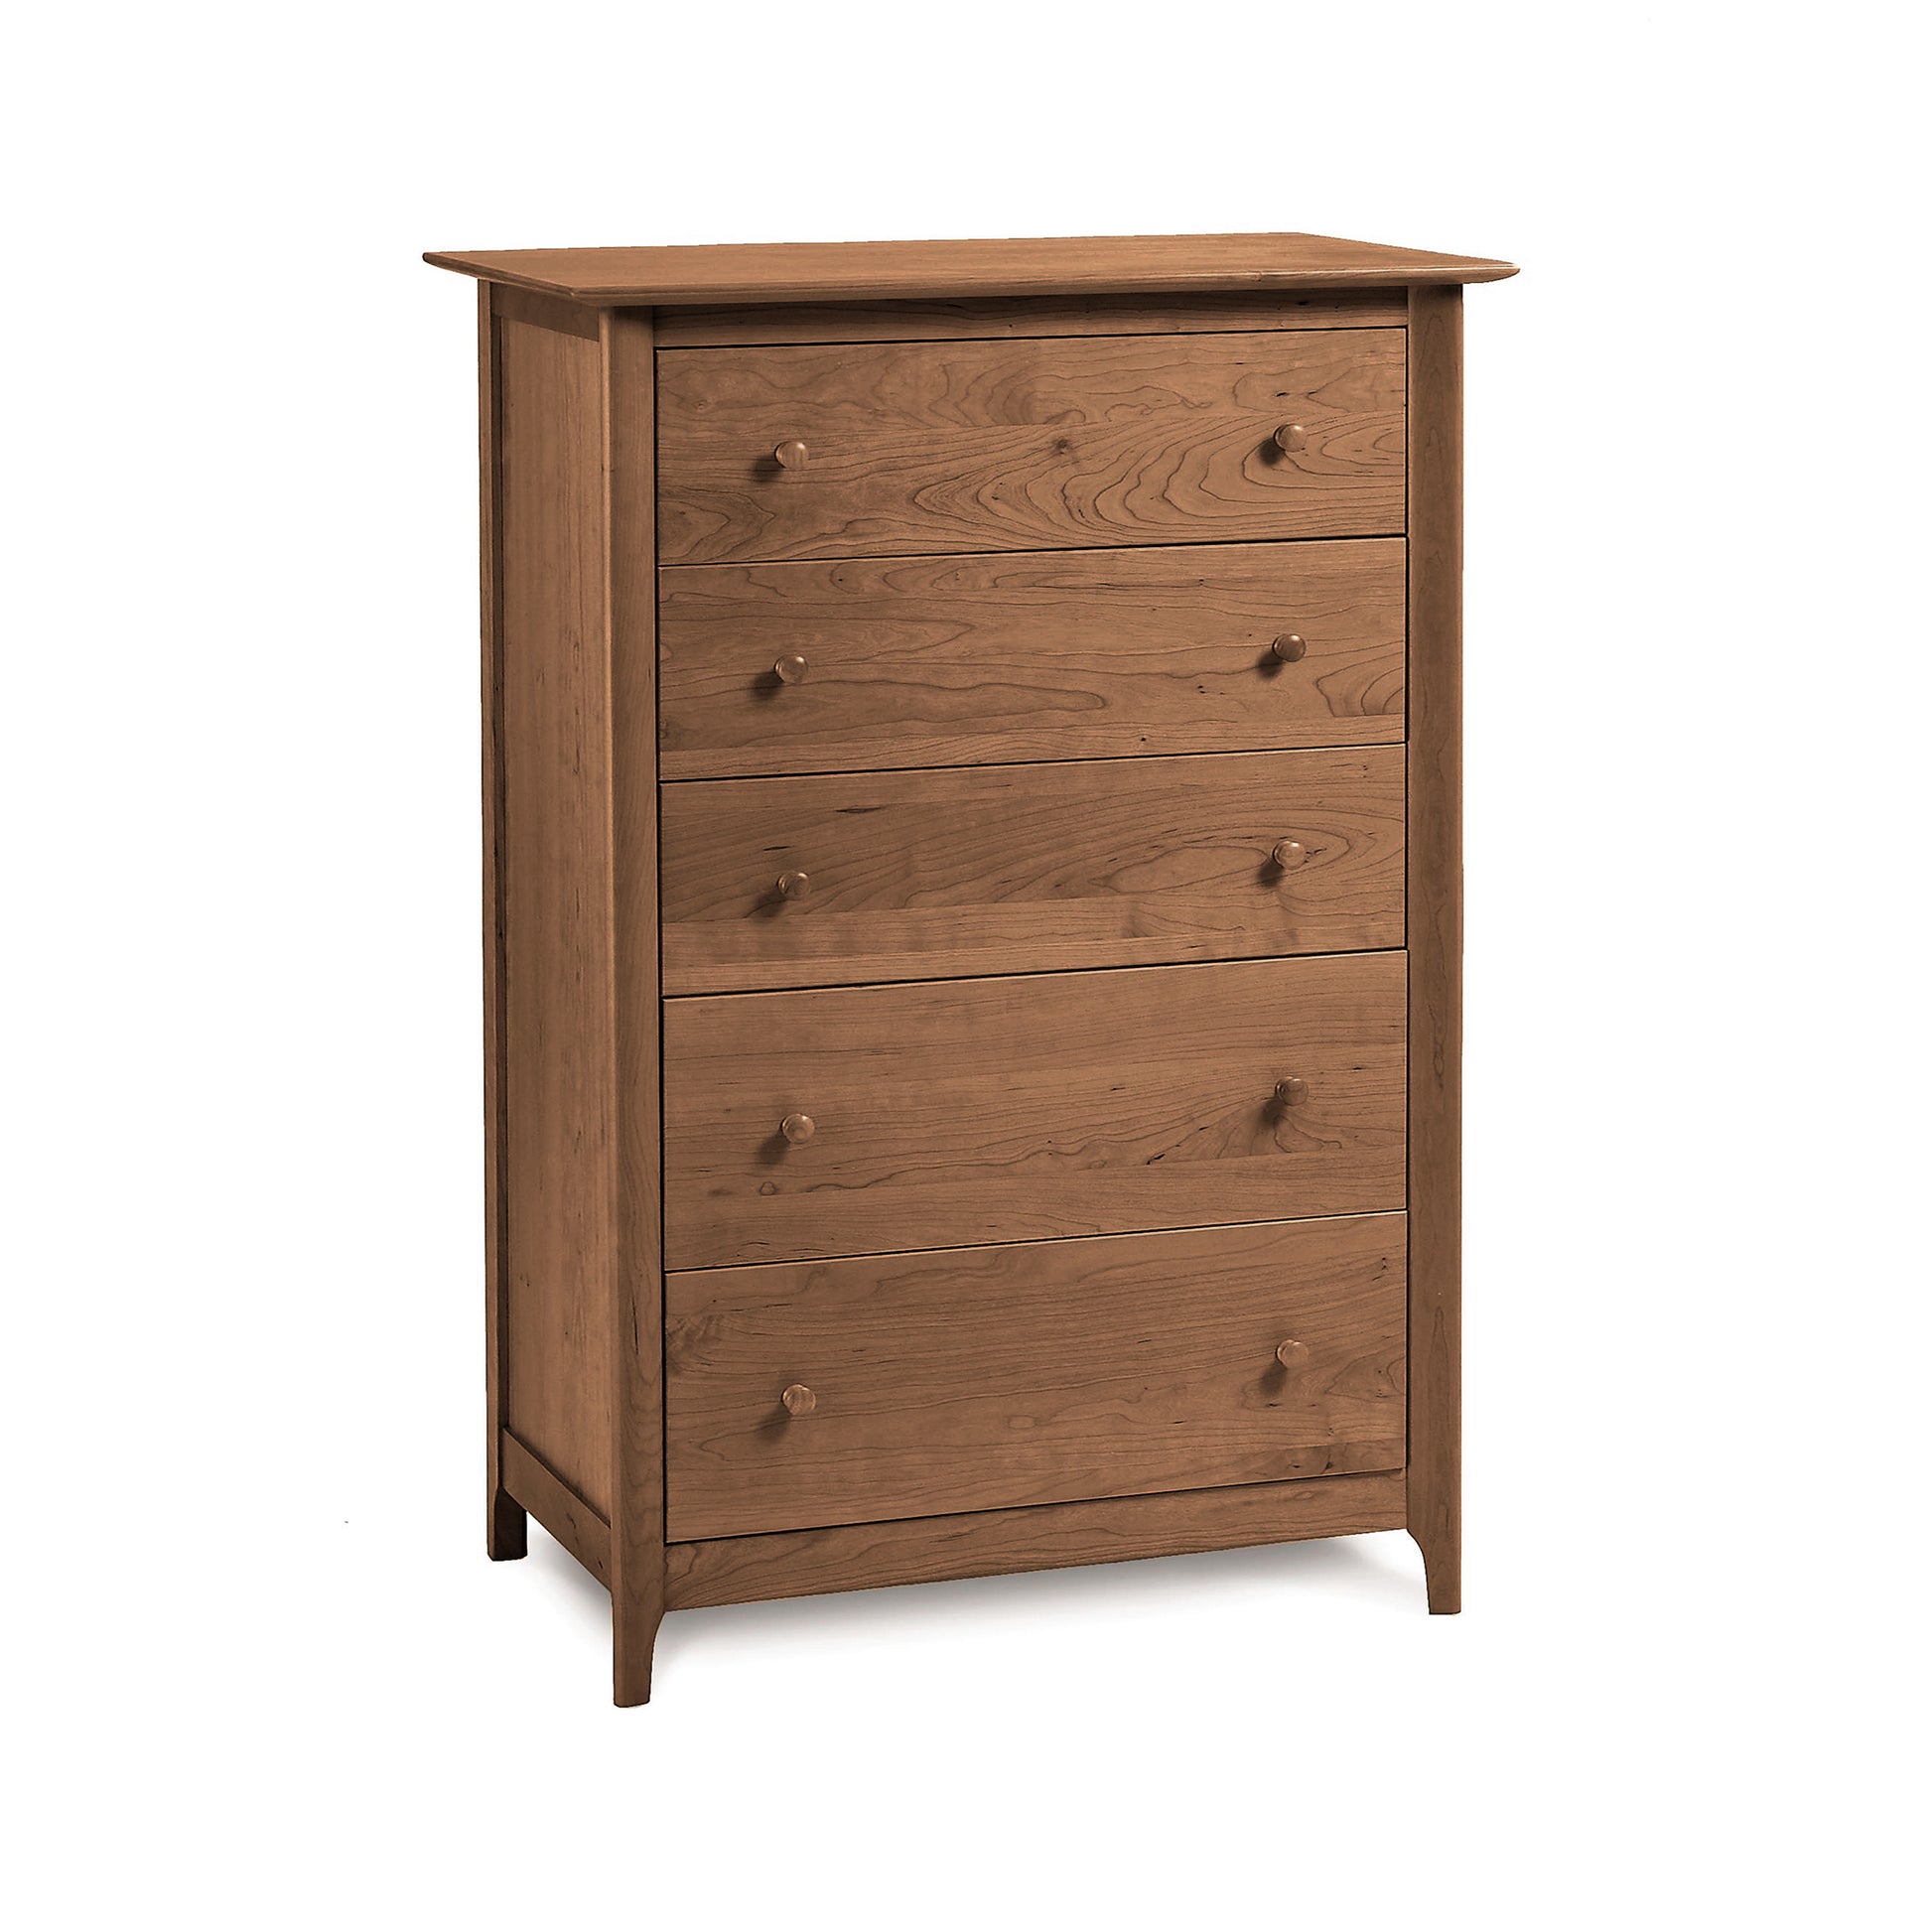 A Sarah 5-Drawer Chest by Copeland Furniture, with a Shaker design, handmade and displayed on a white background.